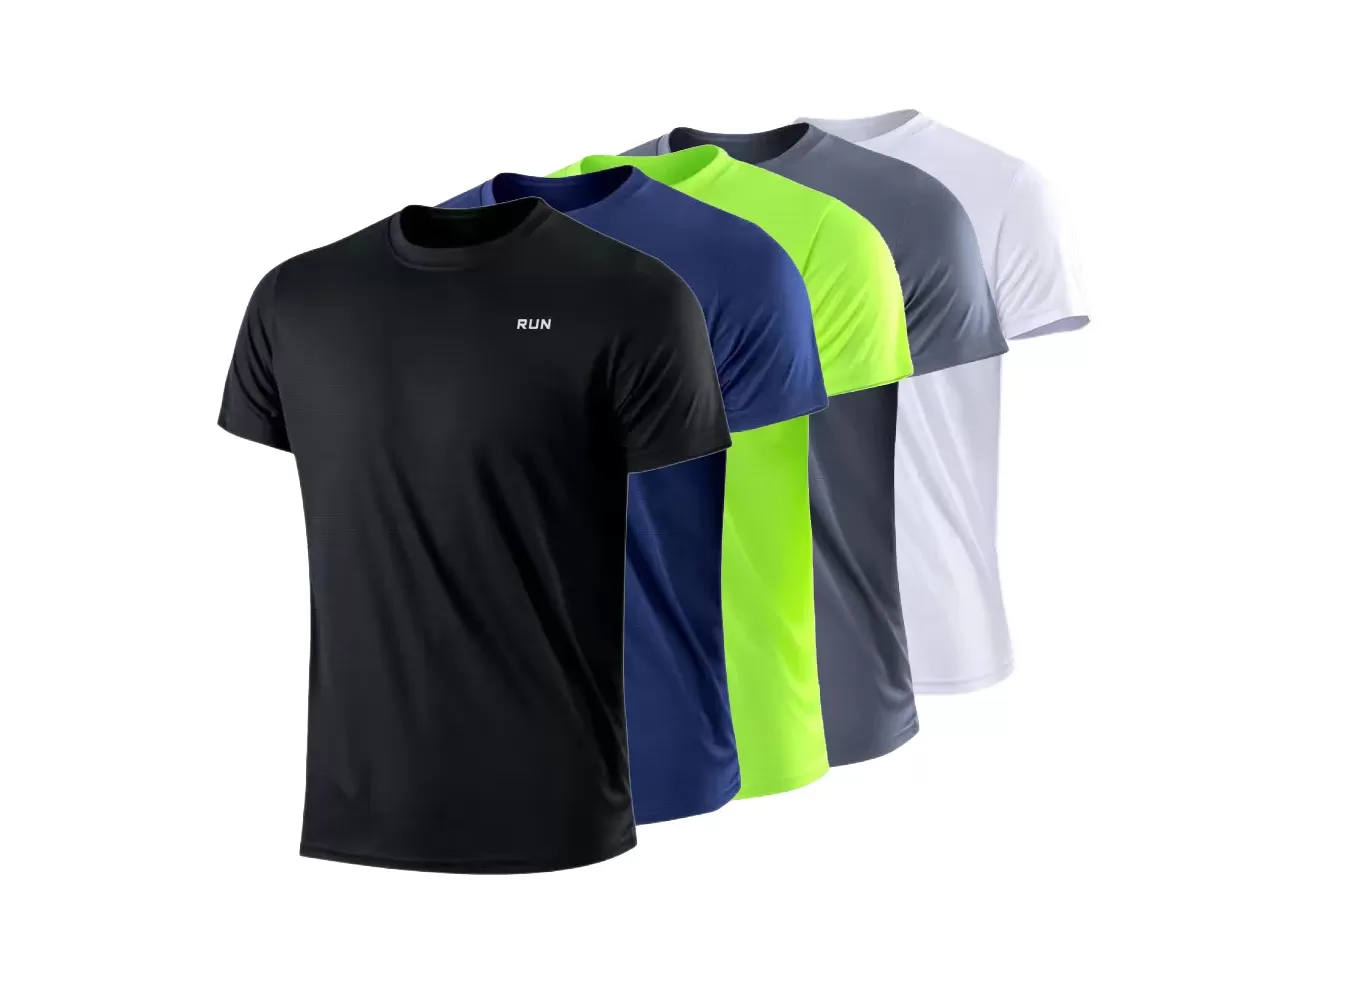 Compression O Neck Quick Dry Men's Running T shirt Tight-Fitting Fitness  Gym Top